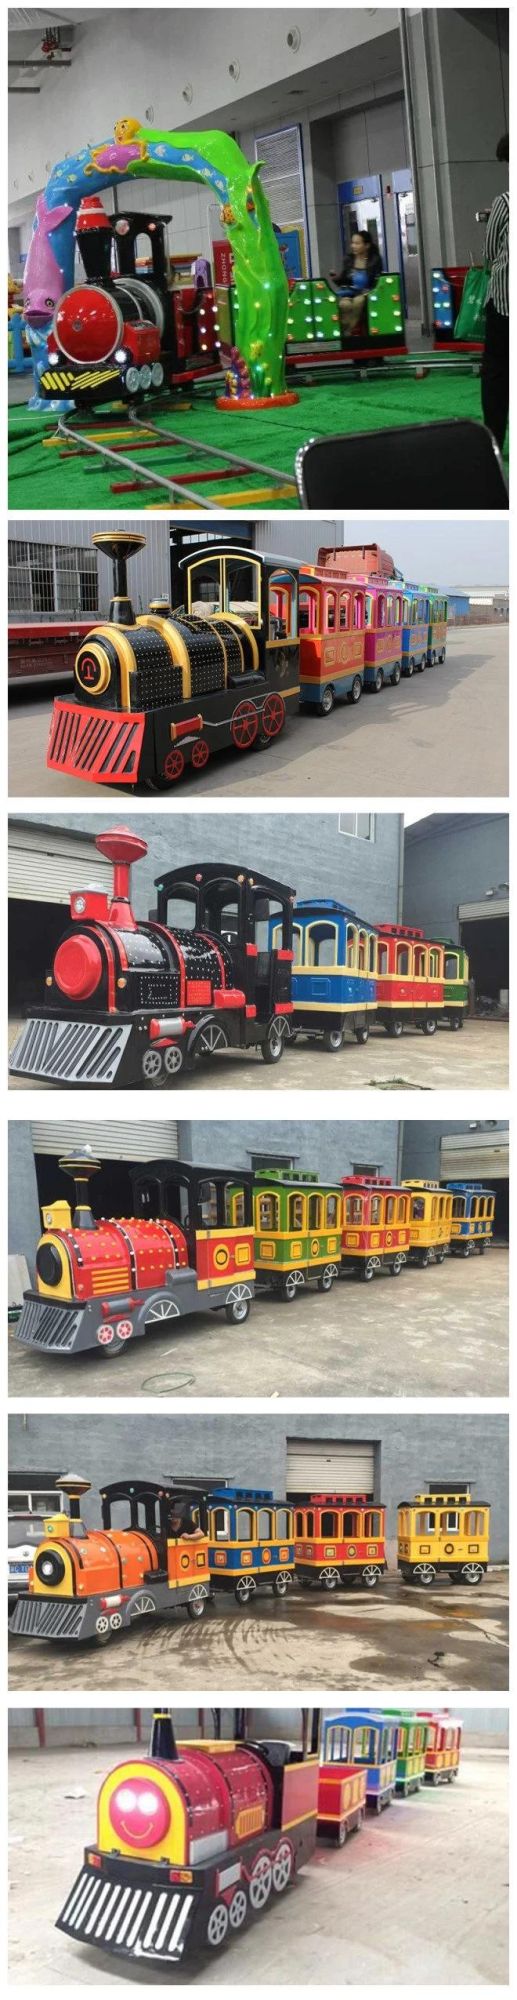 Thomas Train Bed 24 Seats Trackless Train for Sale